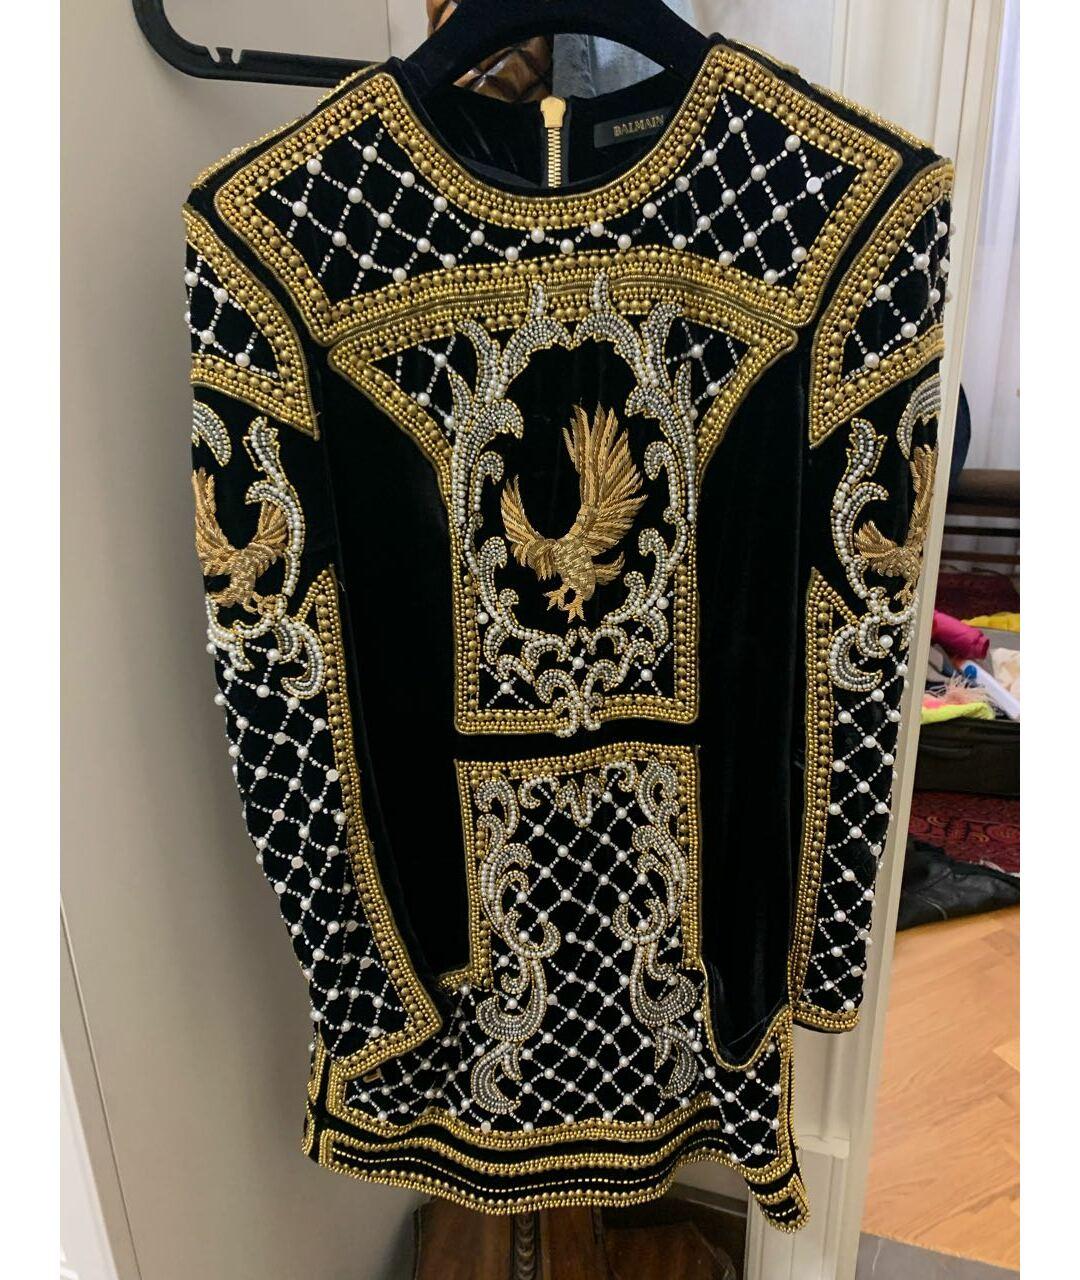 BALMAIN for H&M as seen on KYLEY JENNER 


Evening Black Velvet dress with Gold color trim

Round neck

Long Sleeve

Decorated With Embroidery And Beads 


Size 36 or US 4

Made in India

Pre-owned. Perfect condition

 100% authentic guarantee 

   